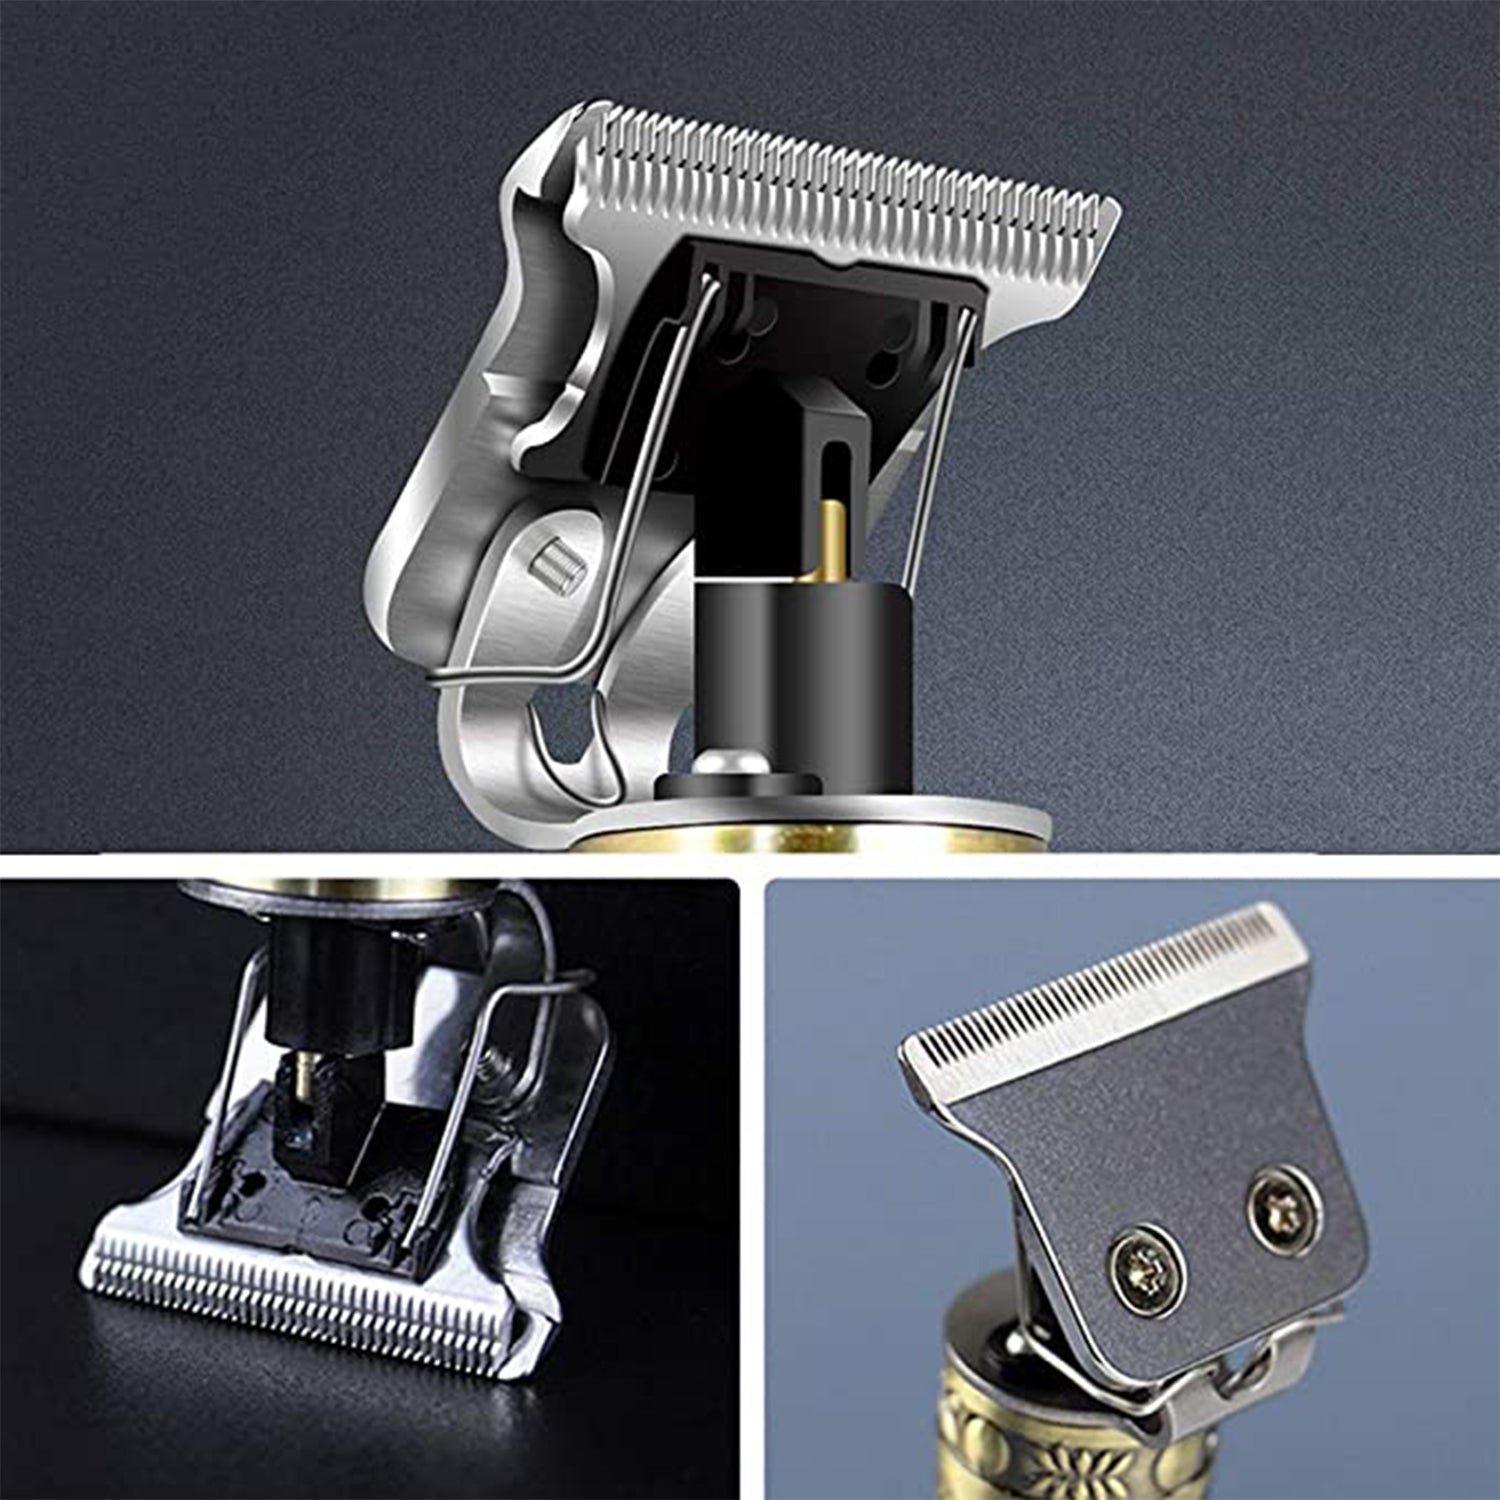 6328 ﻿Electric shaving machine dry shaving for men - hair shaving and trimming beard With adjustable blade clipper. 